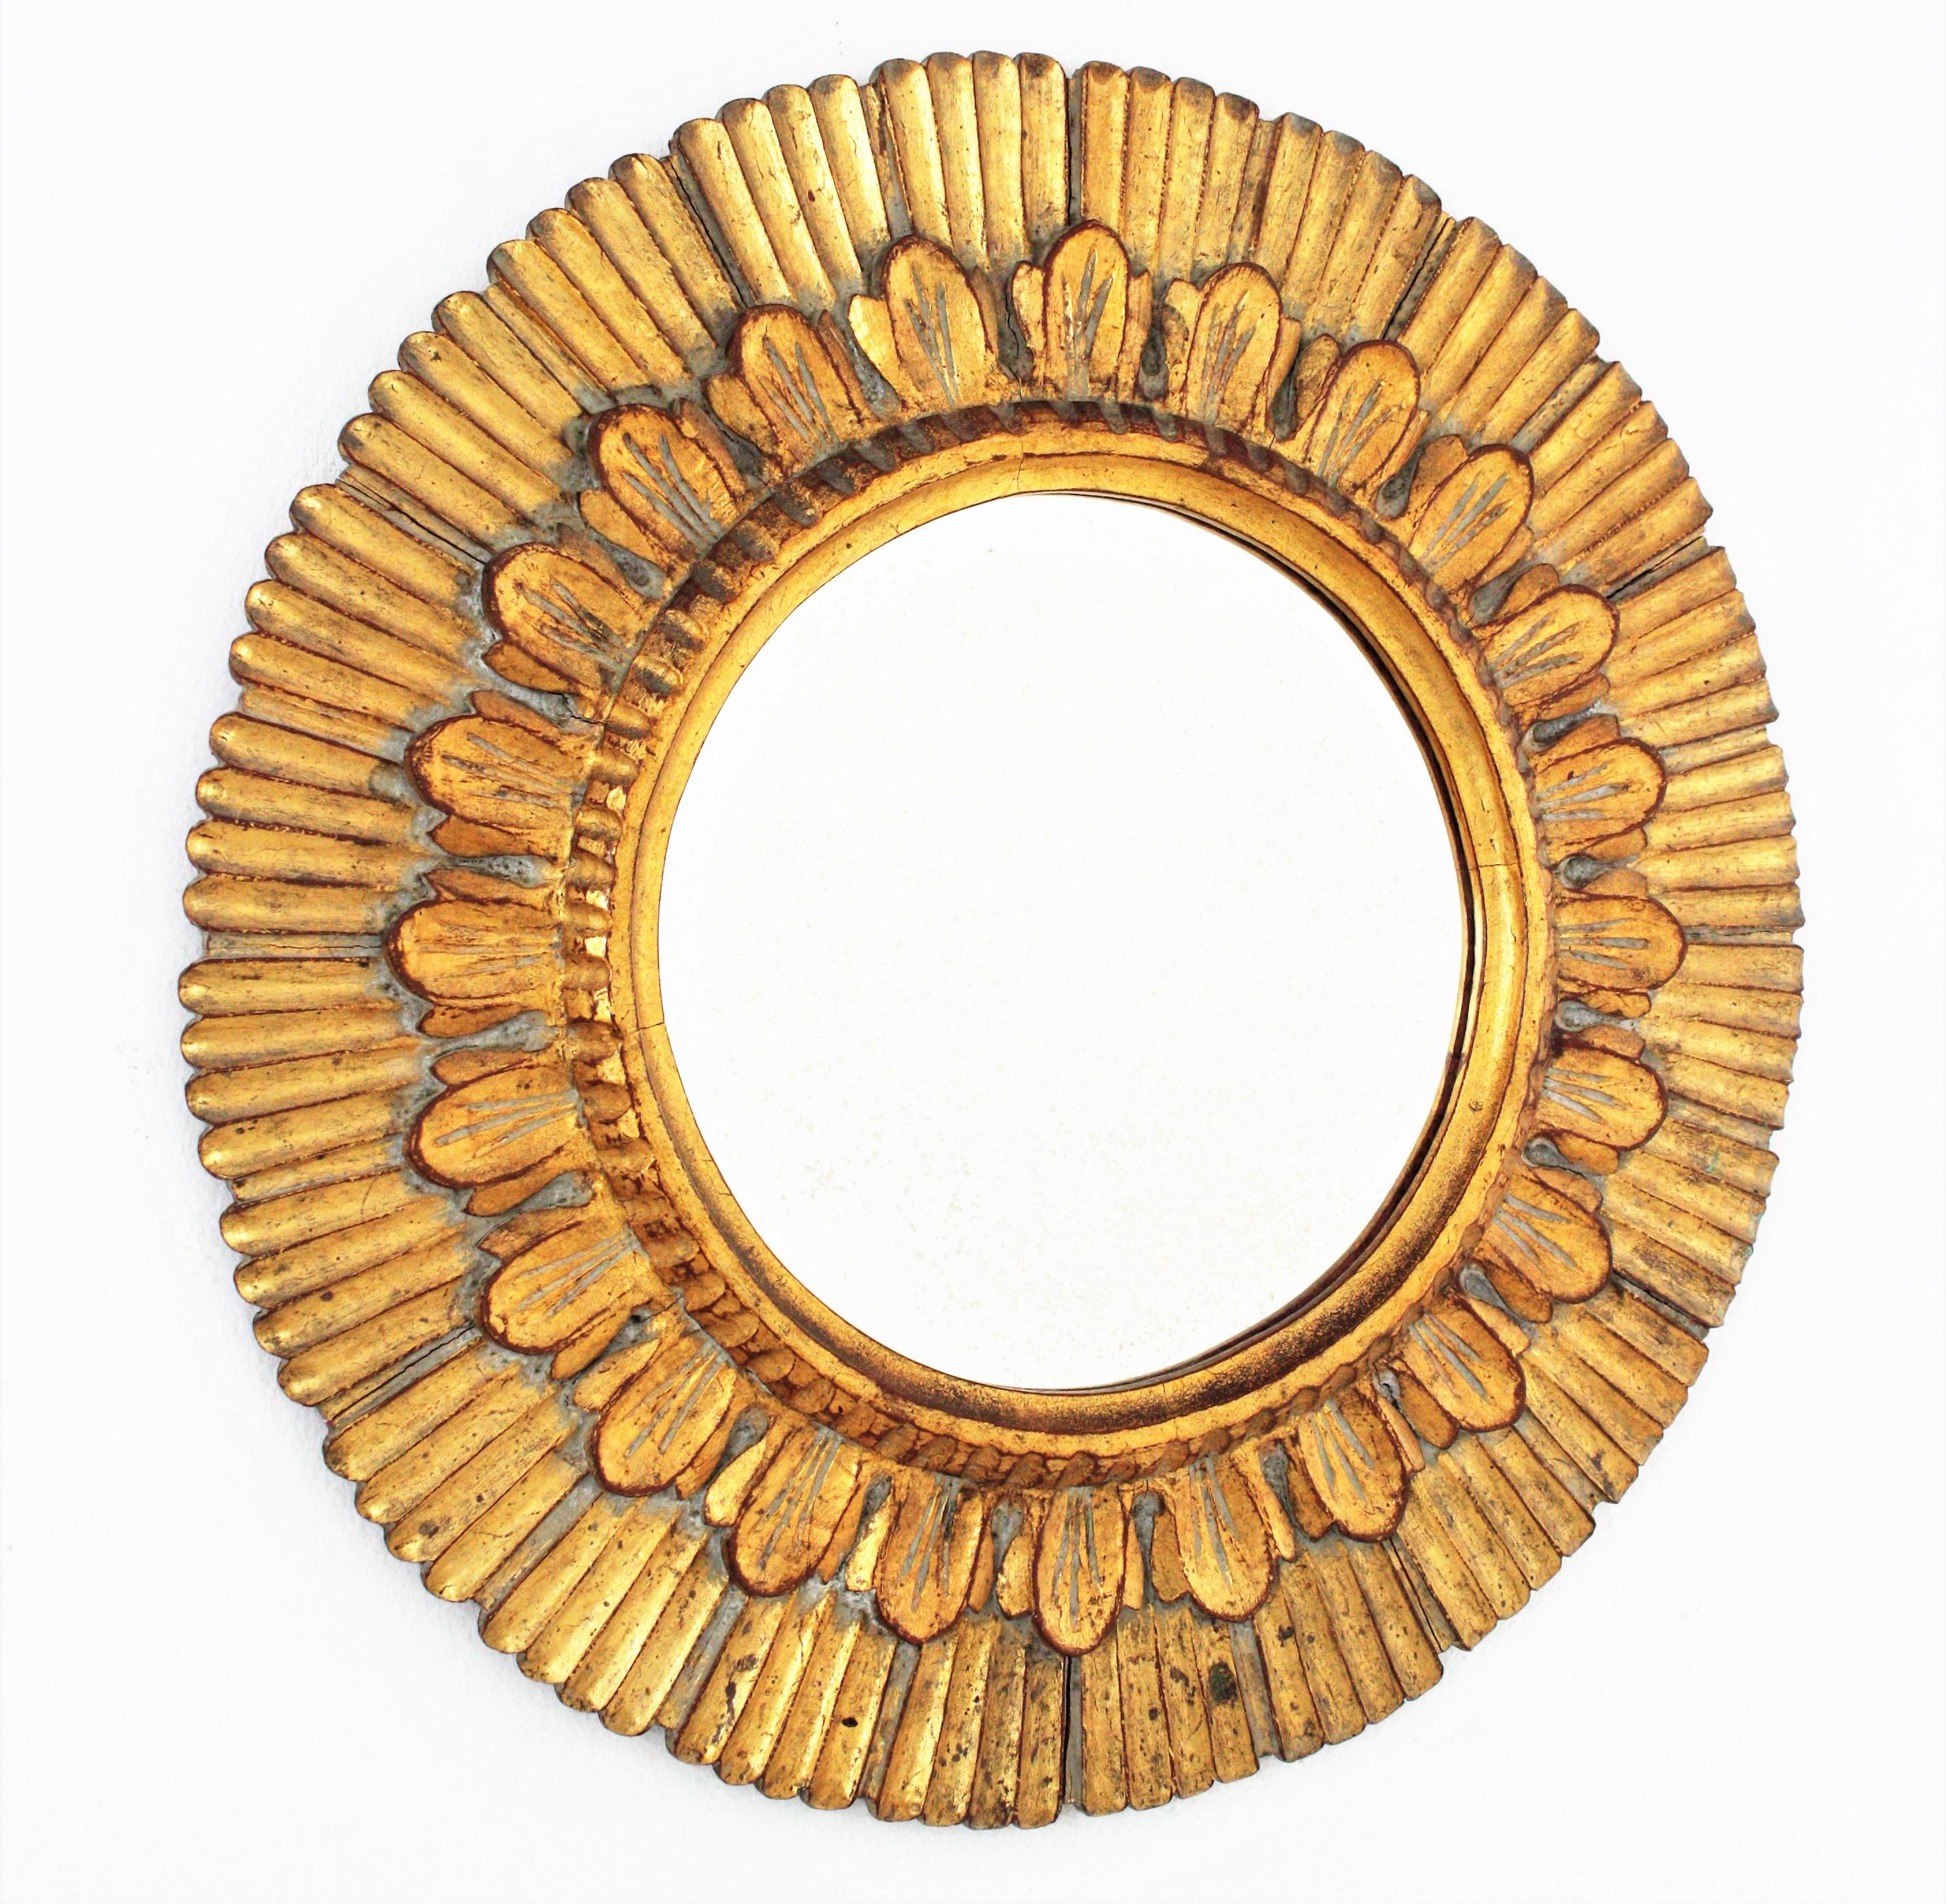 Sunburst mirror, carved wood, gold leaf, Spain, 1950s.
Carved wood and gold leaf gilding. Eye-catching design combining Baroque, Midcentury and Hollywood Regency accents. The frame has striped carving details and gold leaf finish.
 It has a nice